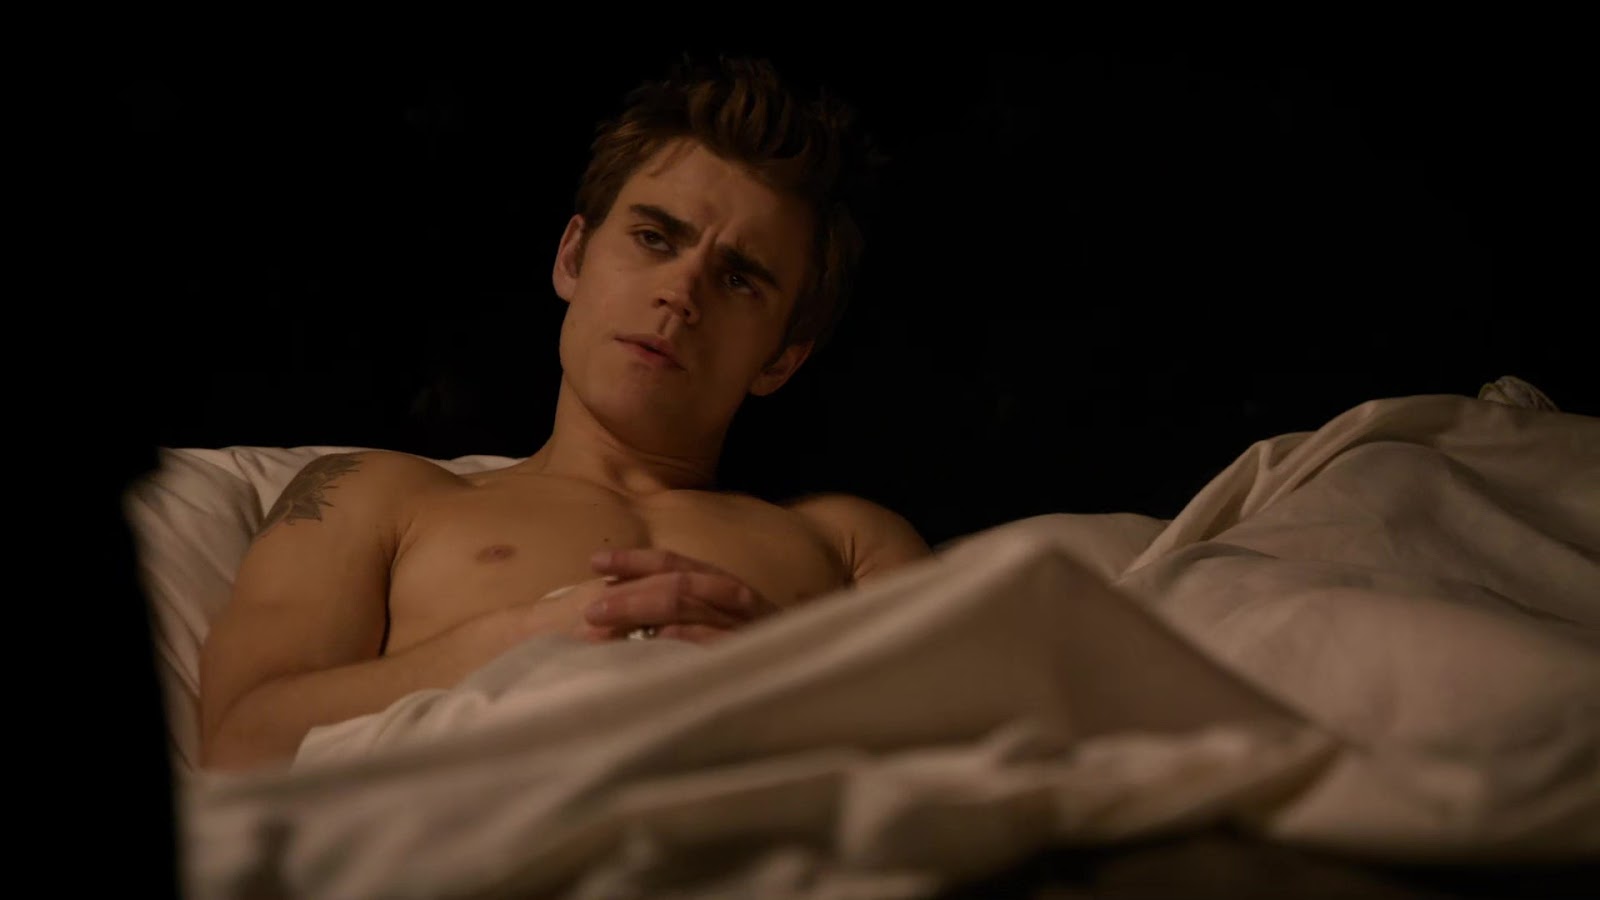 Paul Wesley shirtless in The Vampire Diaries 1-13 "Children Of The Dam...